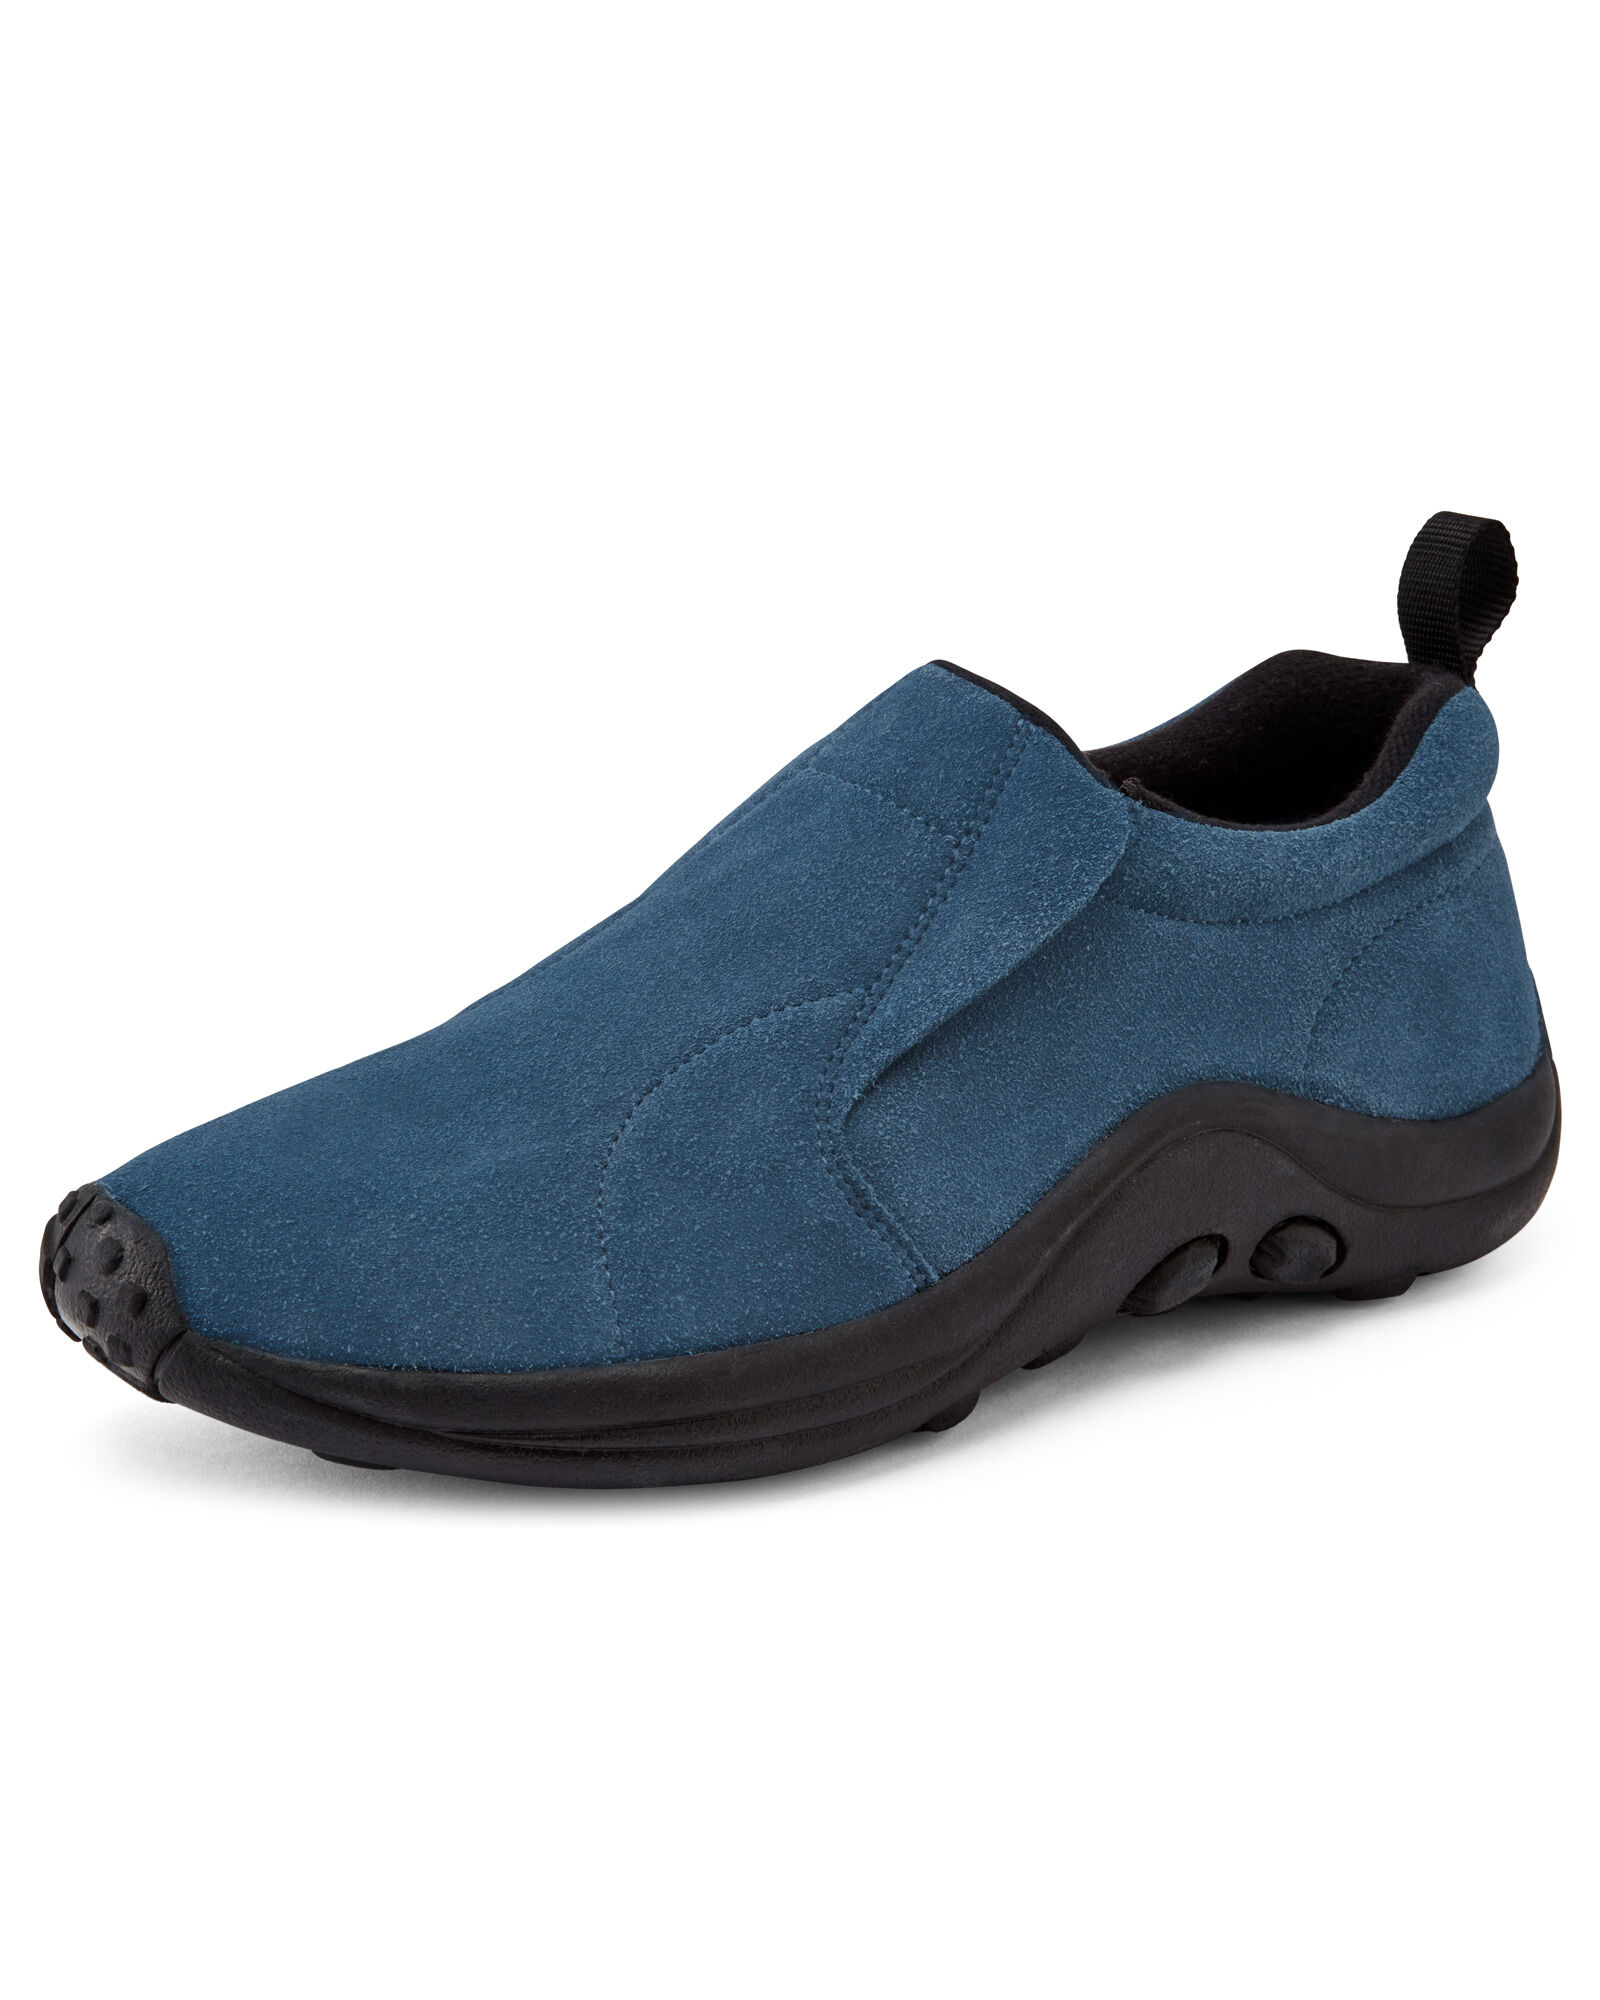 Wide Fit Suede Slip-Ons at Cotton Traders